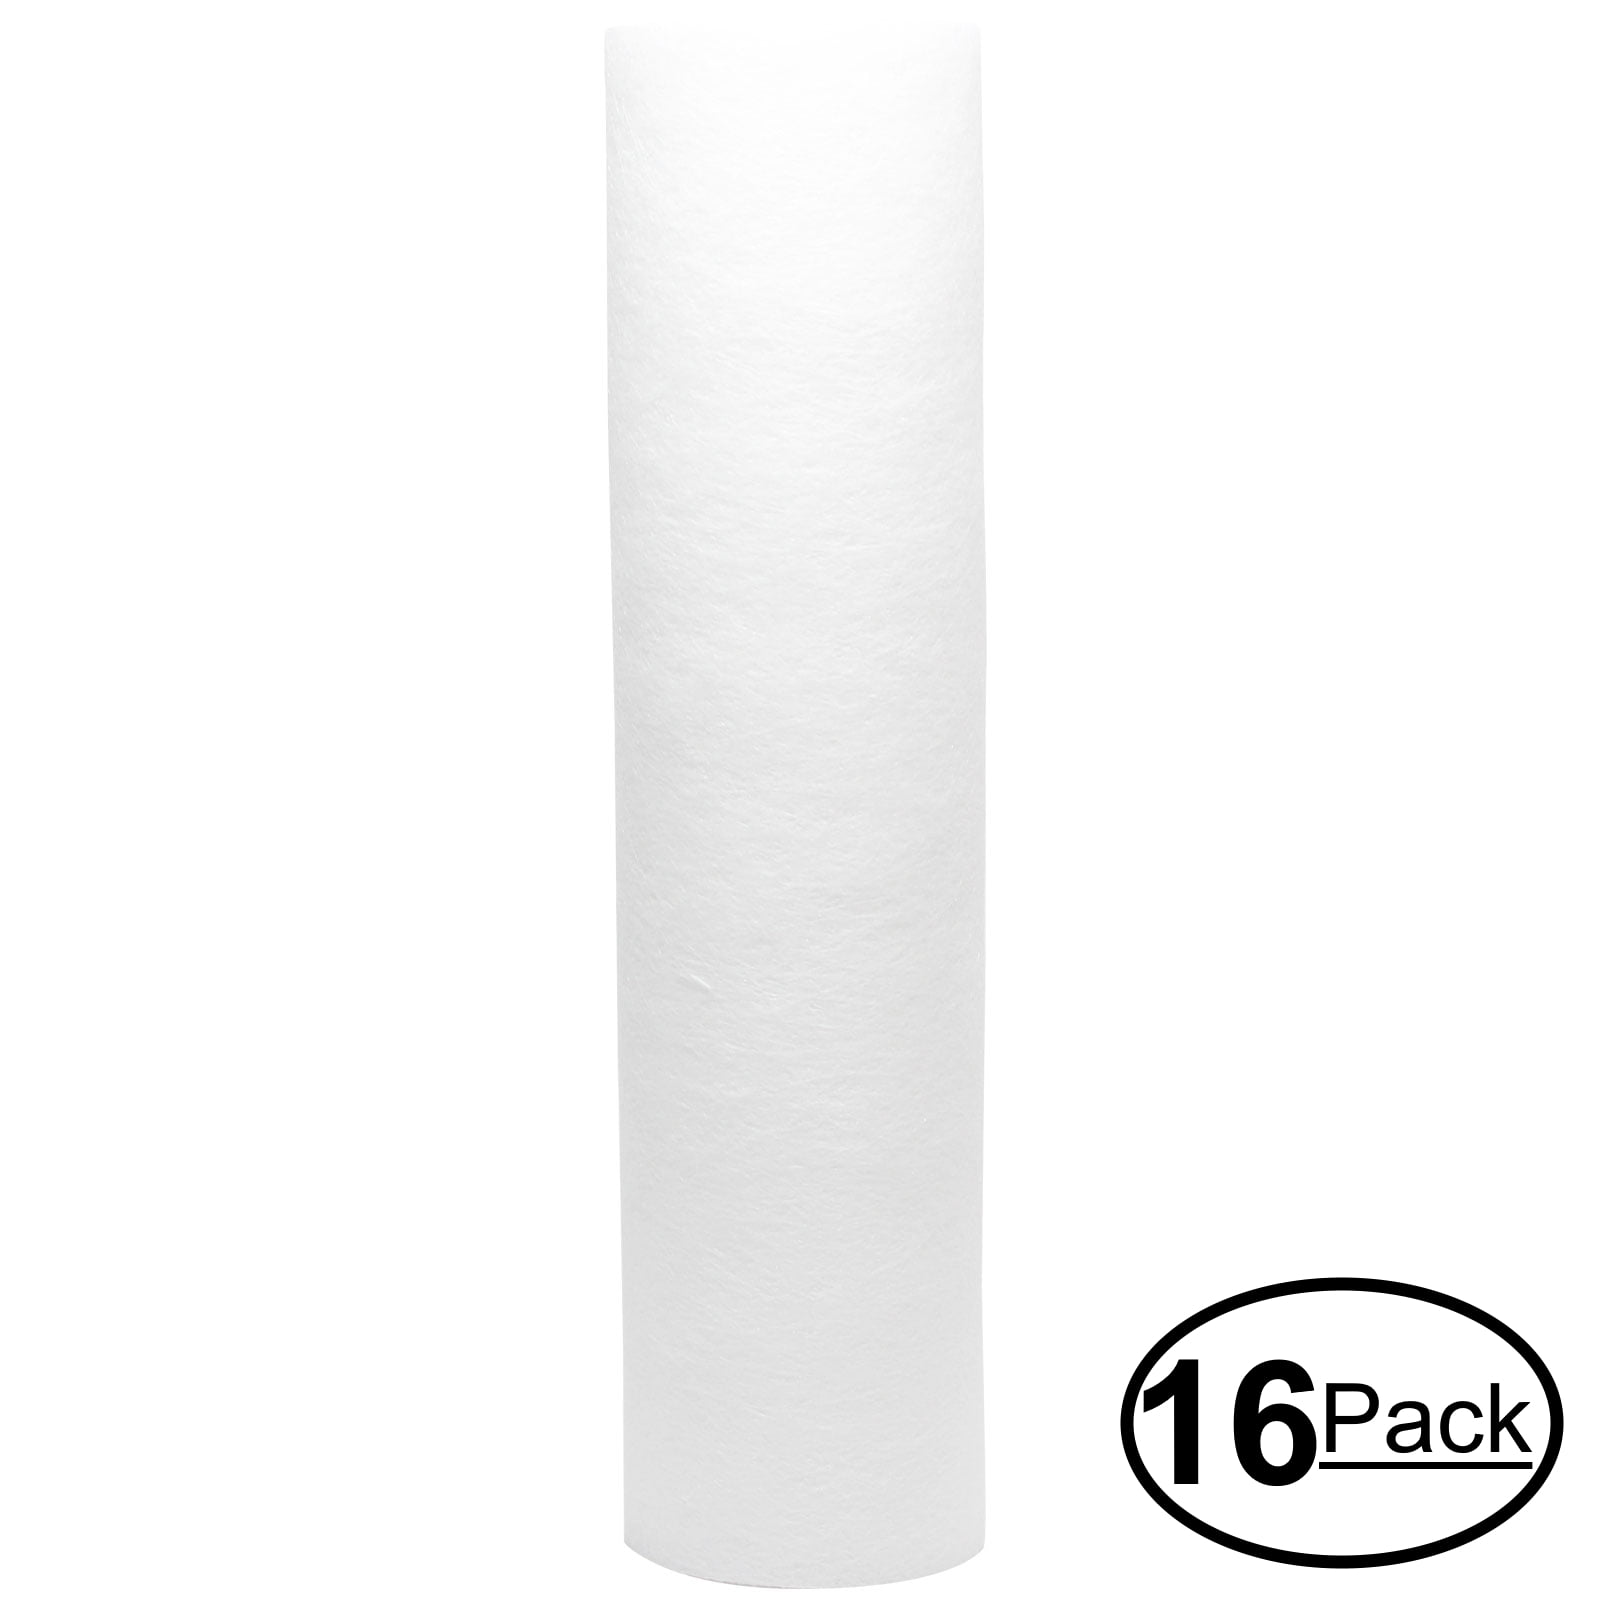 Denali Pure Brand 3-Pack Replacement for Hydronix HF2-10BLBK14 Polypropylene Sediment Filter Universal 10-inch 5-Micron Cartridge Compatible with Hydronix HF2-10BLBK14 NSF listed 10 Blue Body 